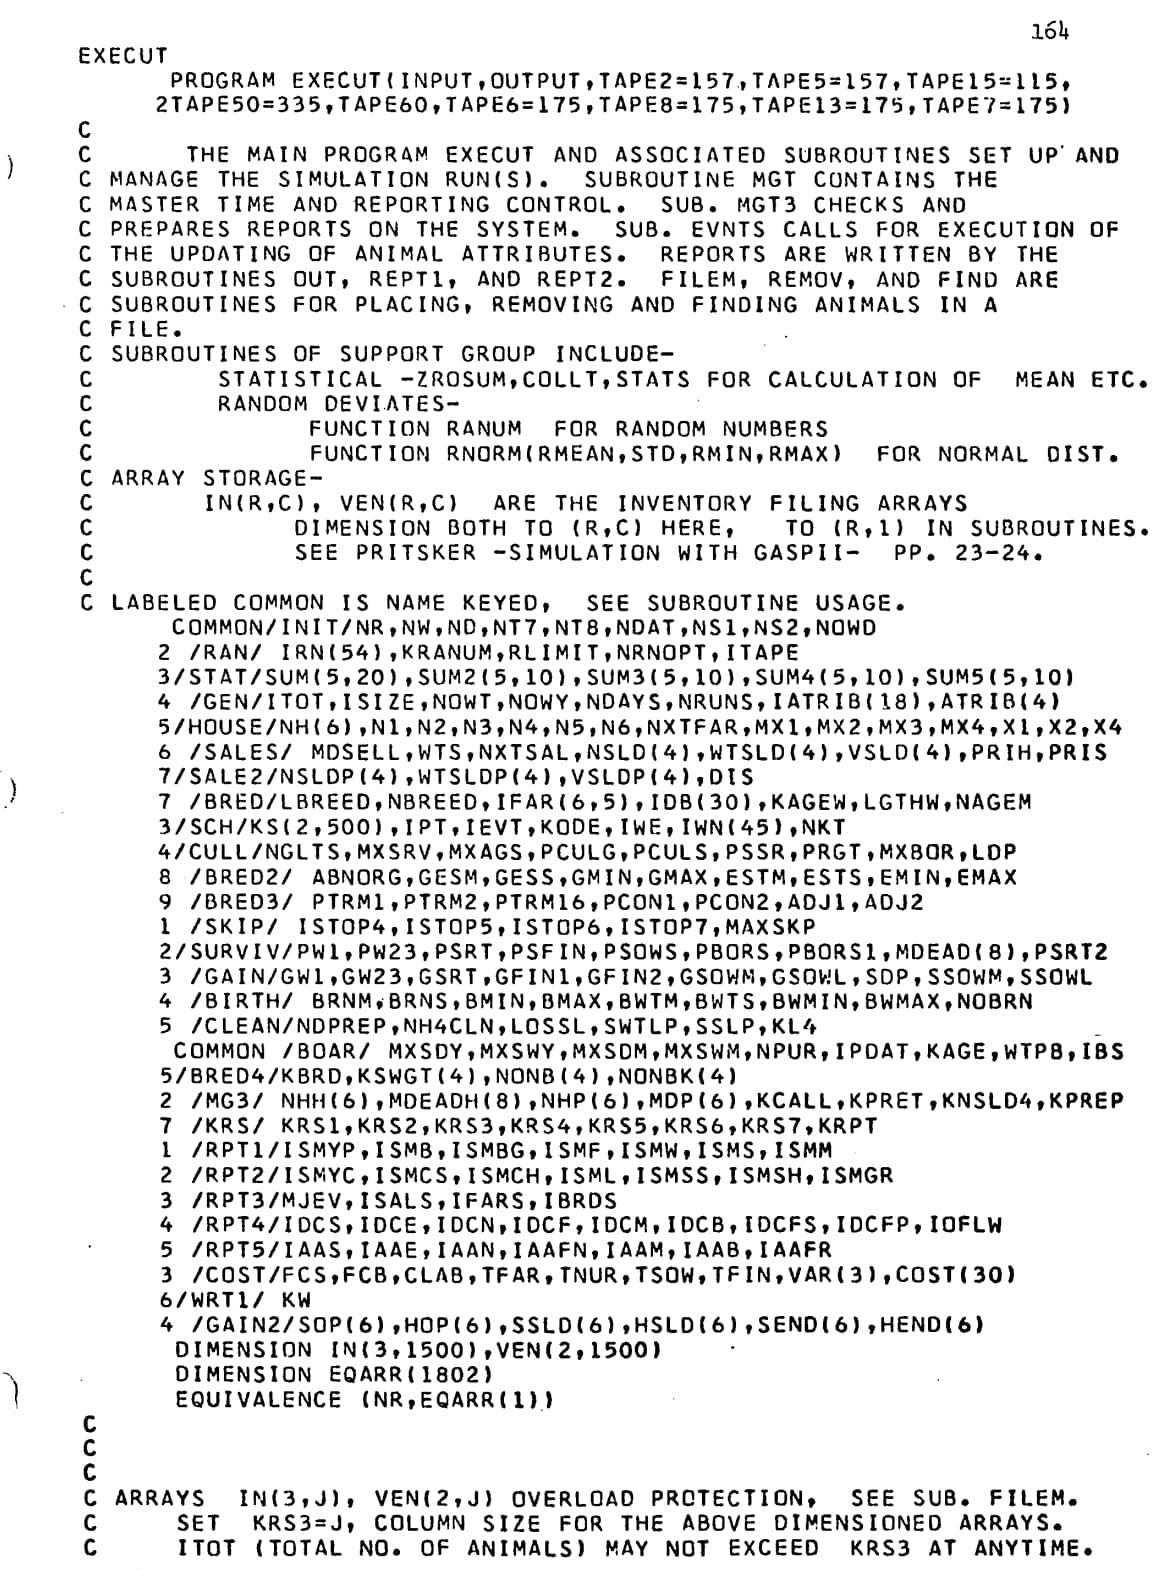 A full typewritten page of code, part of which appears to be near-indecipherable